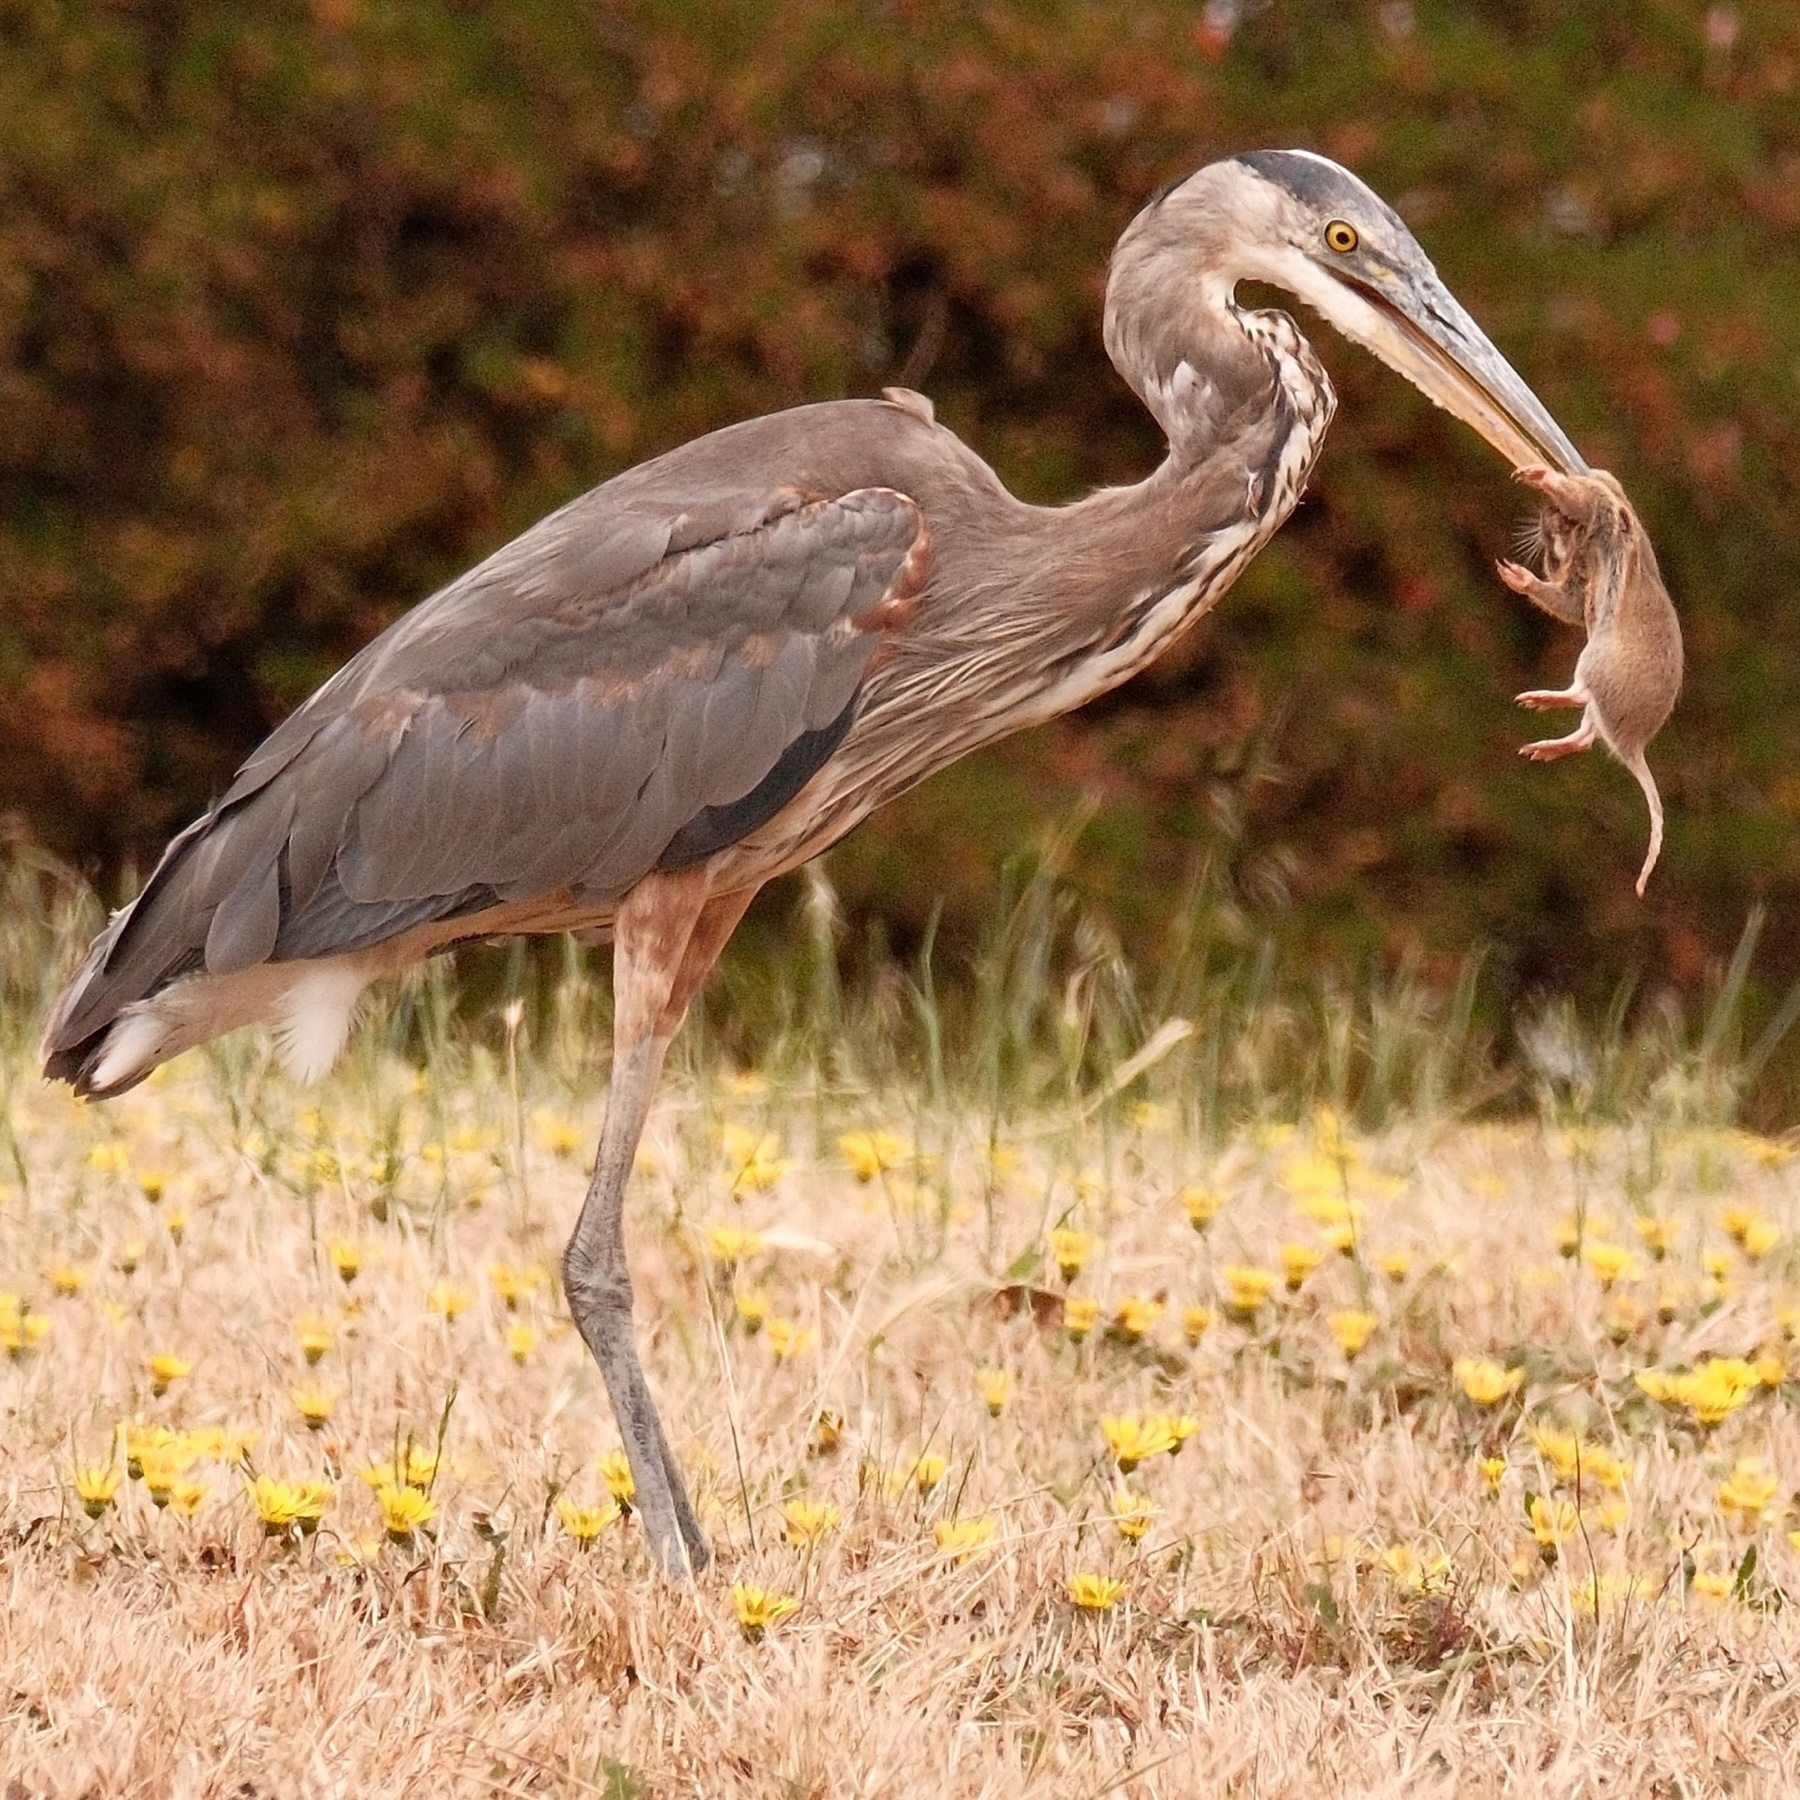 A Great Blue Heron stands in a dry grassy area with yellow flowers. It has a gopher’s neck in its mouth and the entire gopher is hanging.